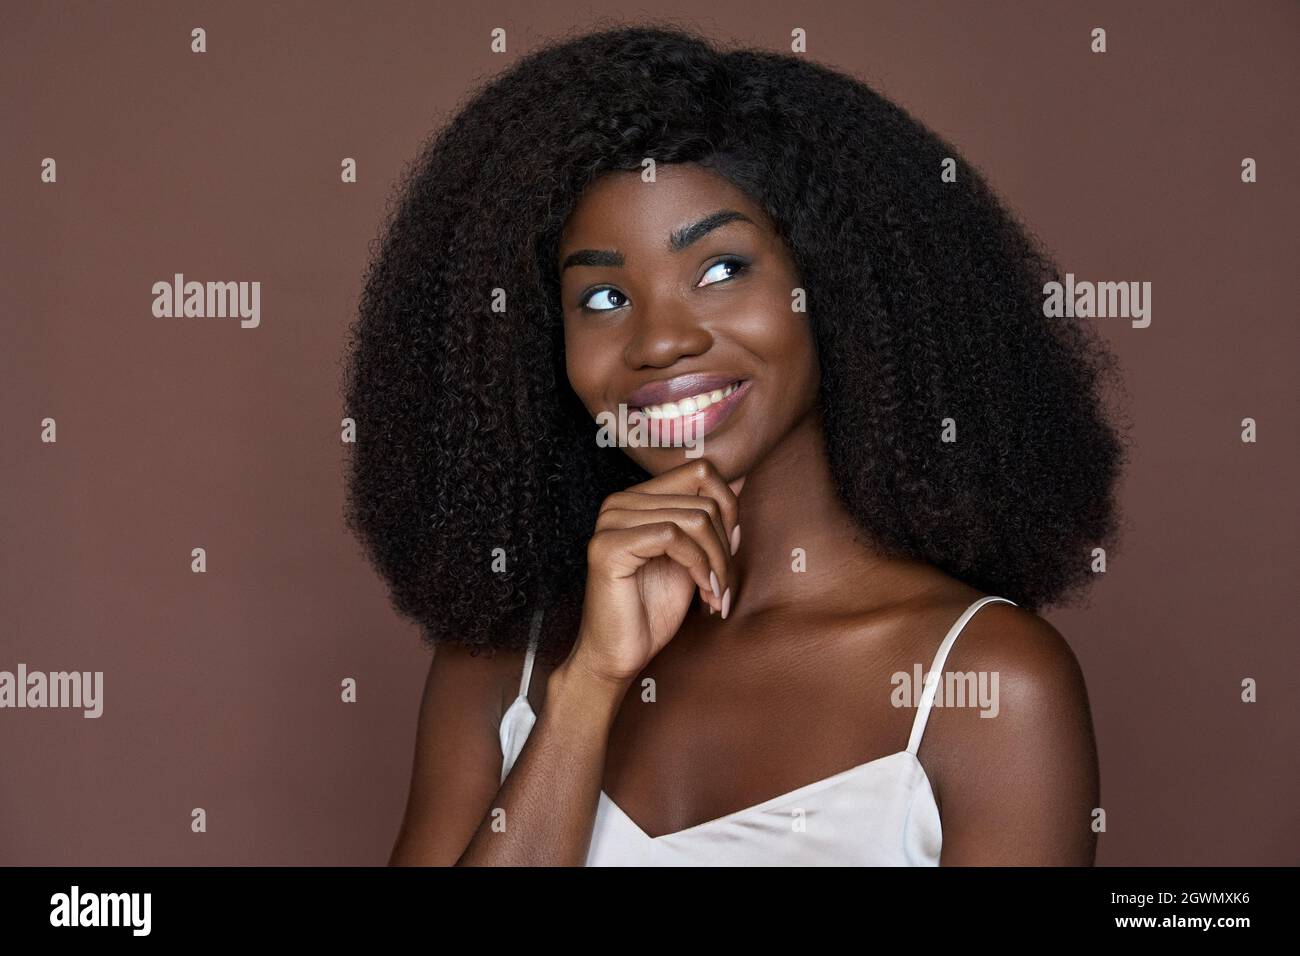 Young black gorgeous girl touching face isolated on brown. Headshot portrait. Stock Photo